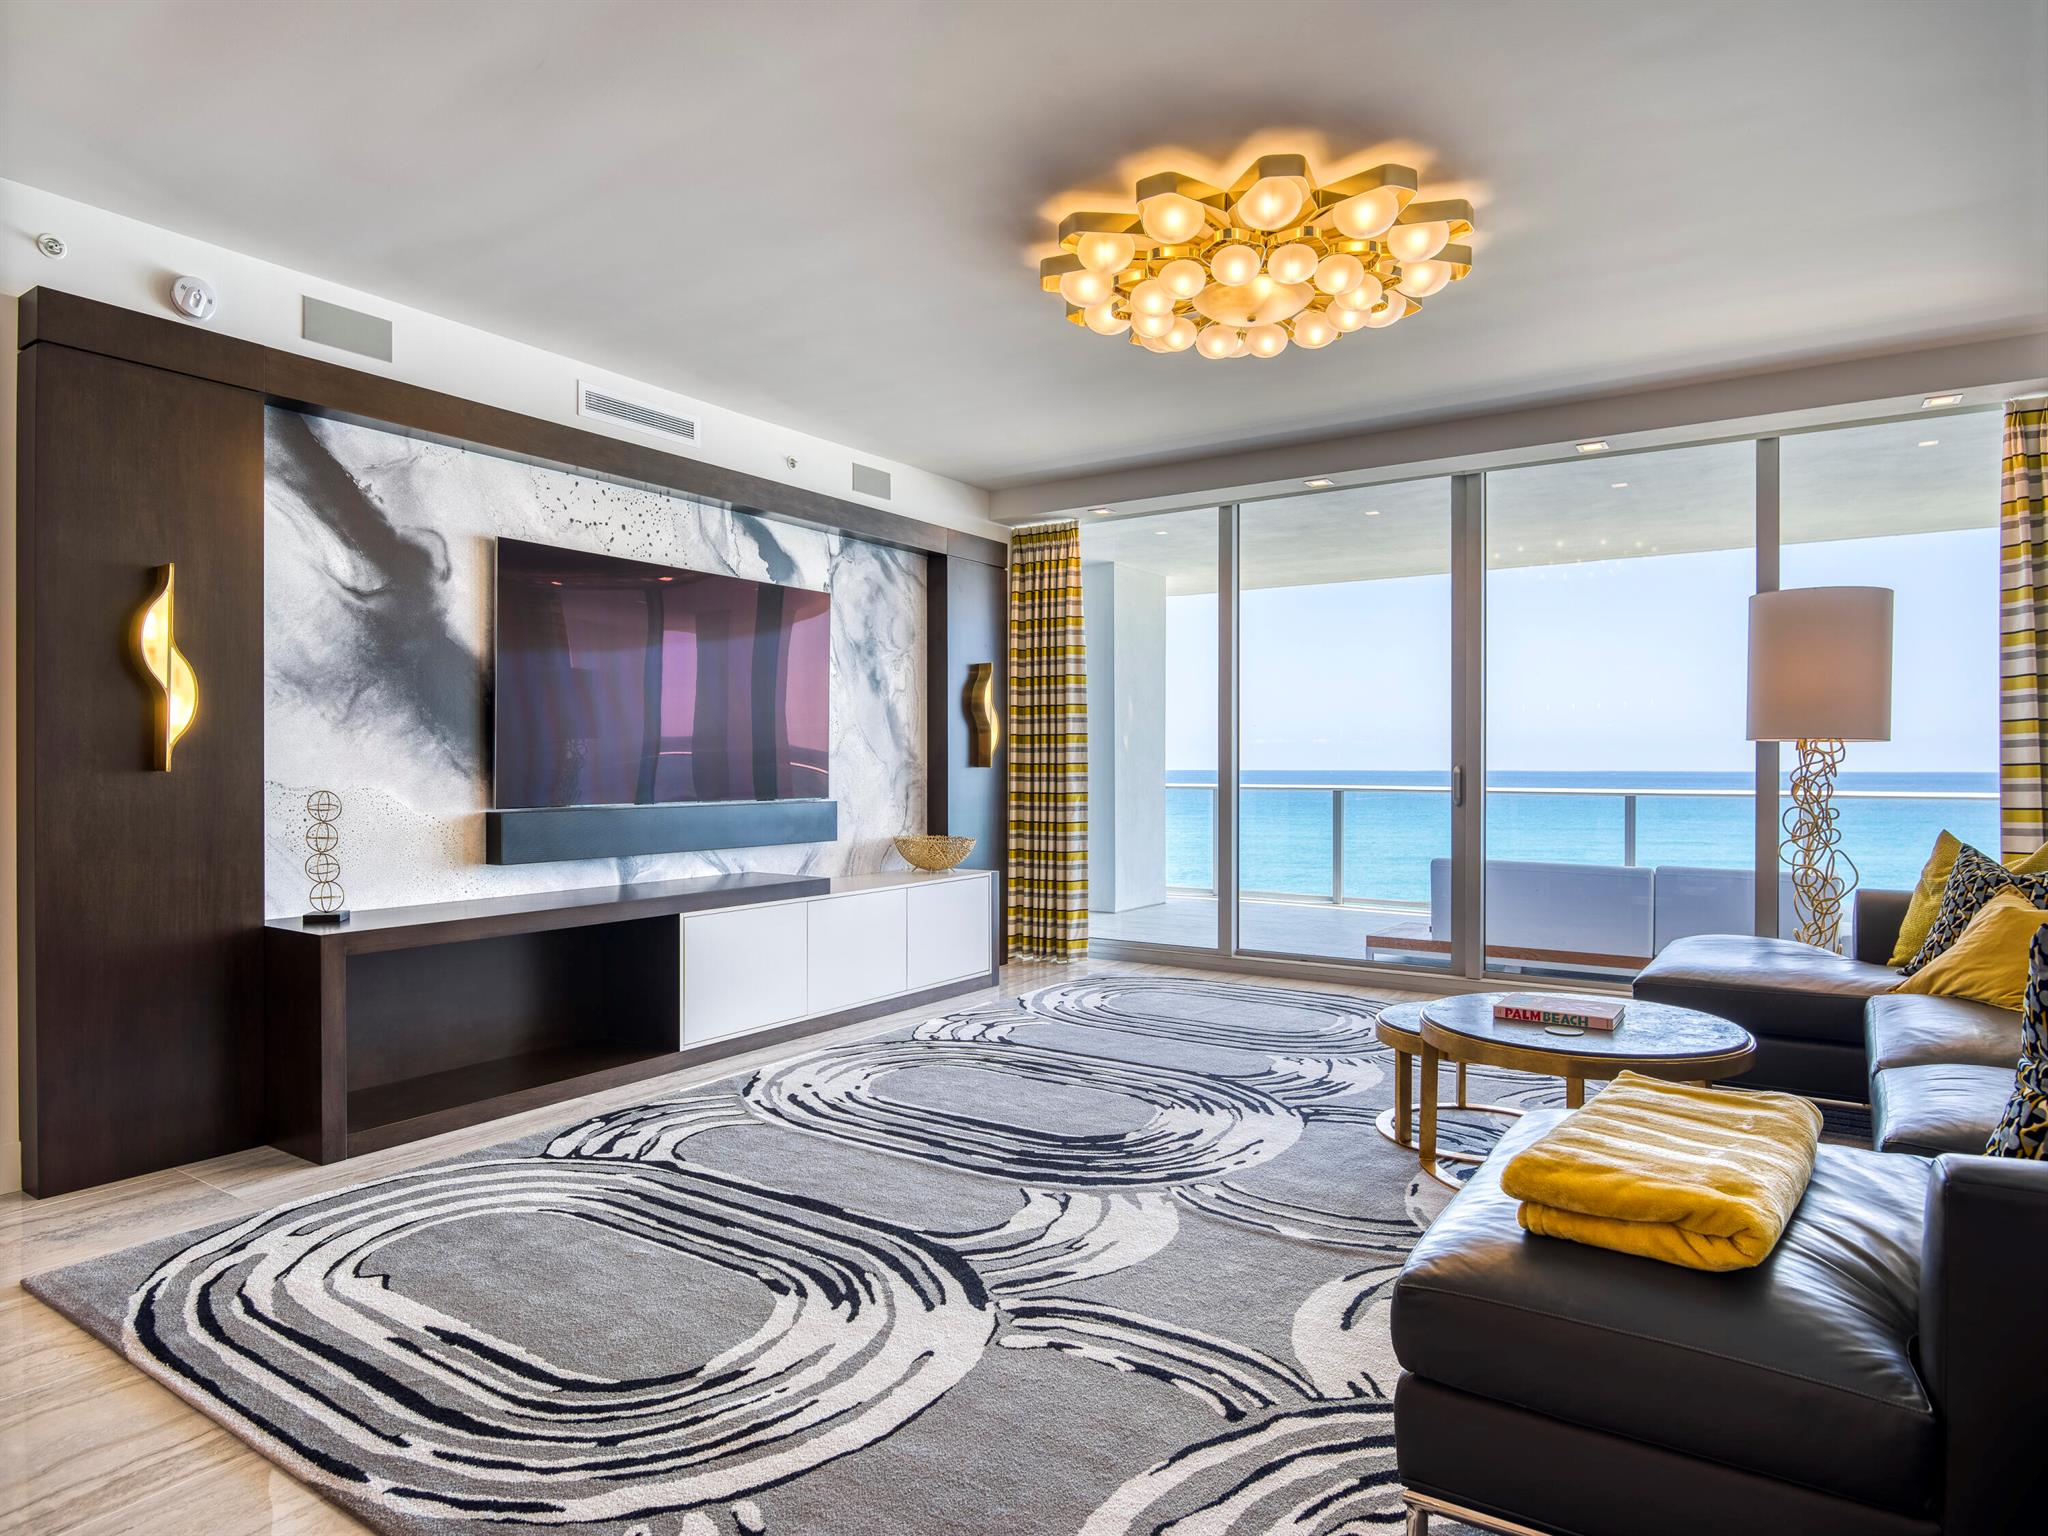 Take your private elevator to this dramatic, turnkey, retro-inspired oceanfront condo in the heart of Singer Island!  Featured in Florida Living Magazine and designed by ASID Design Award Winner, Lorraine Rogers, this oceanfront masterpiece features over $1 million in custom upgrades including geometric, veneered walls, custom silk and wool rugs, and lighting from all over the world to suit the needs of the homeowners who used the unit as their oceanfront pied-a-terre.  Additionally, the entire unit was pre-wired for Control 4 and Lutron technology which allows you to control music, TVs, blackout shades, drapery, lighting, wireless thermostat from your mobile device, installed control panel and touch panels throughout the unit.  Watch the magnificent, unobstructed sunrise over the Atlantic